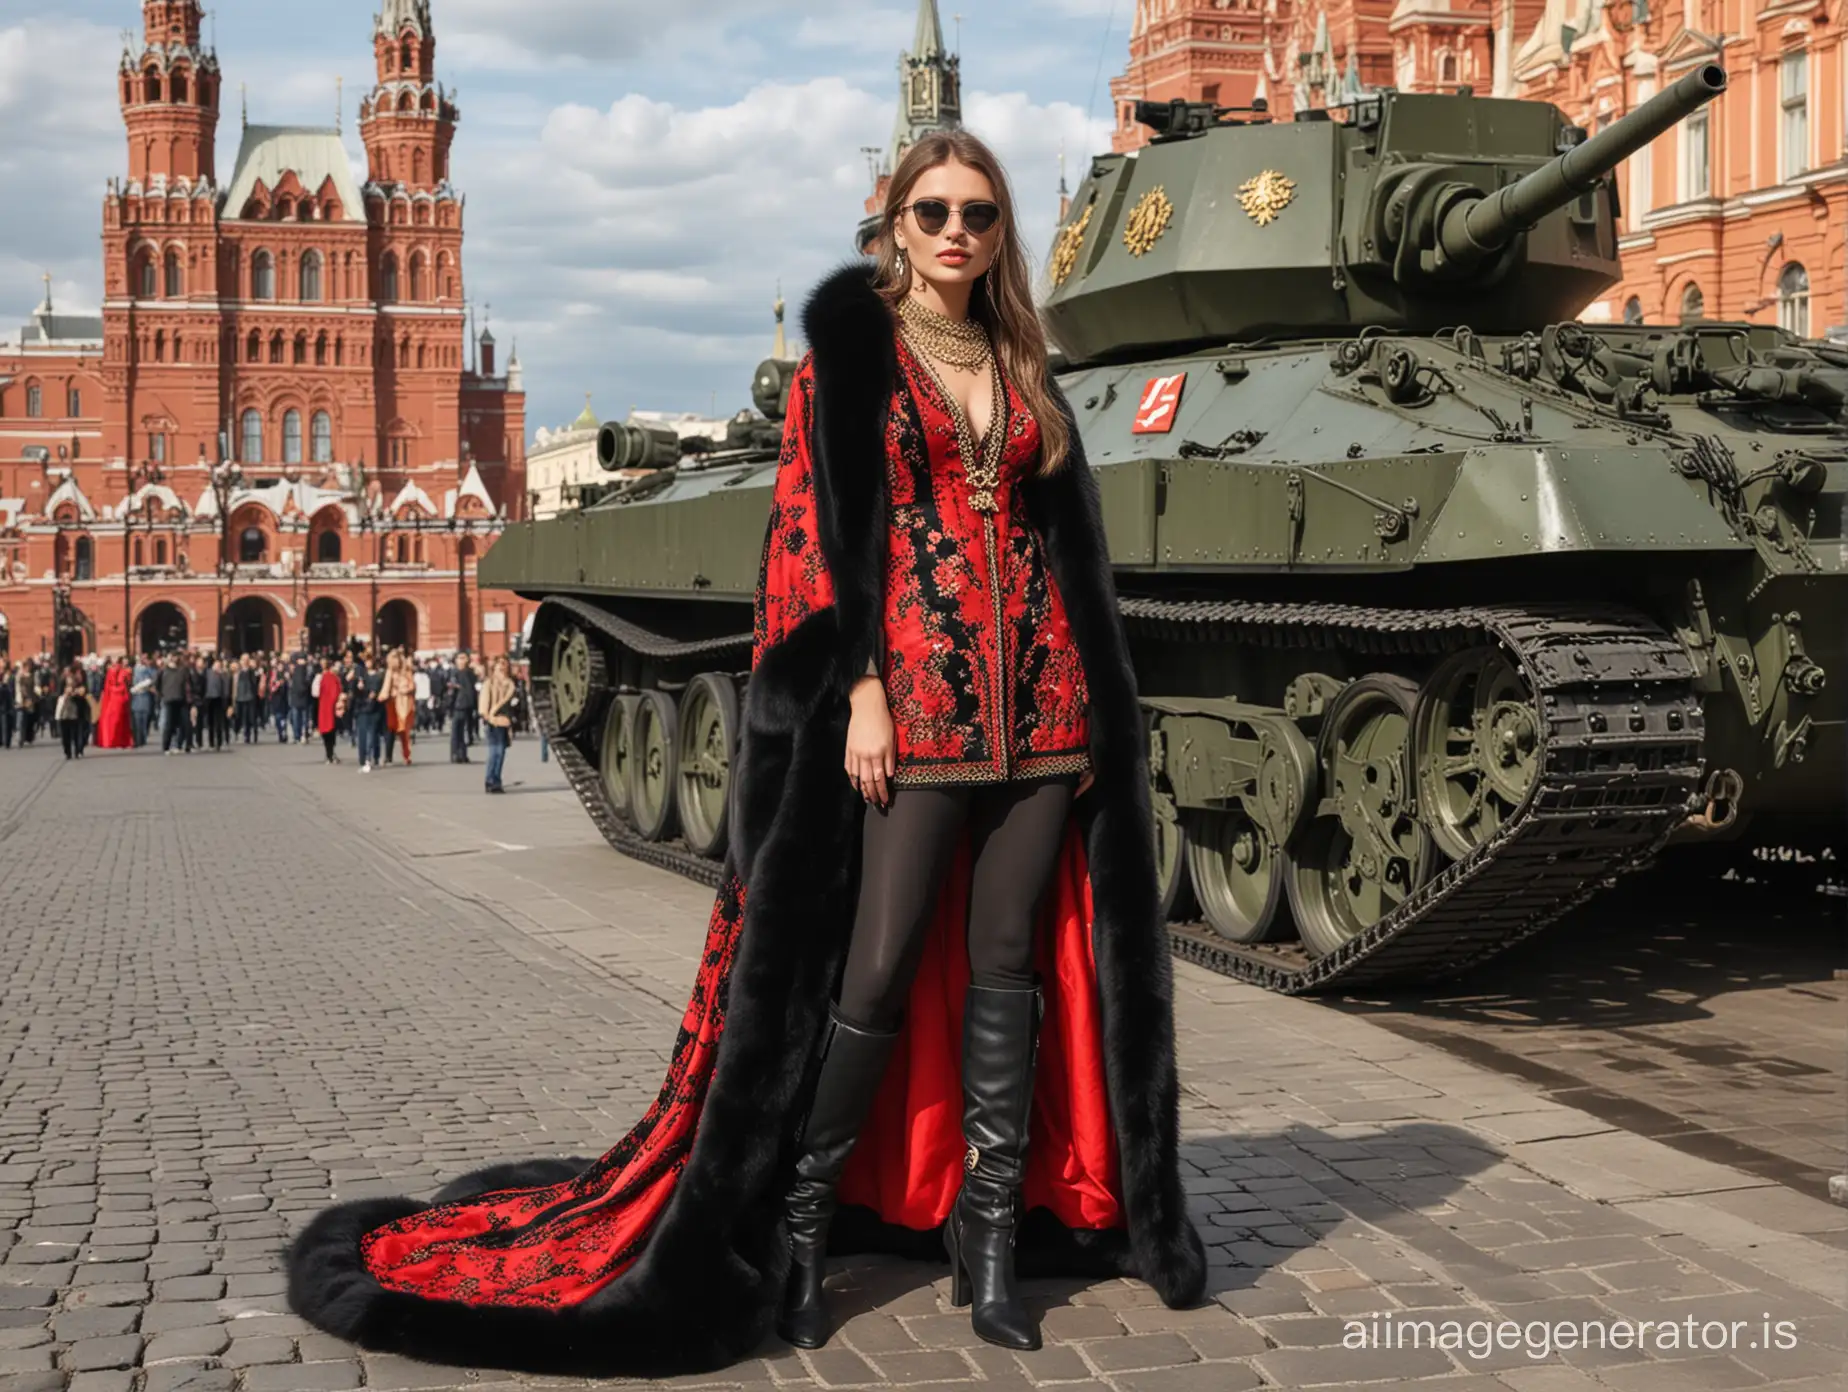 Thin Russian girl, with extra-large sunglasses, a lot of rings, bracelets and collars, dressed in a Black mink fur chapka, an extra large red silk embroidered long dress, and long black thigh-high boots with high heels in front of a khaki battle tank n the red square in moscow